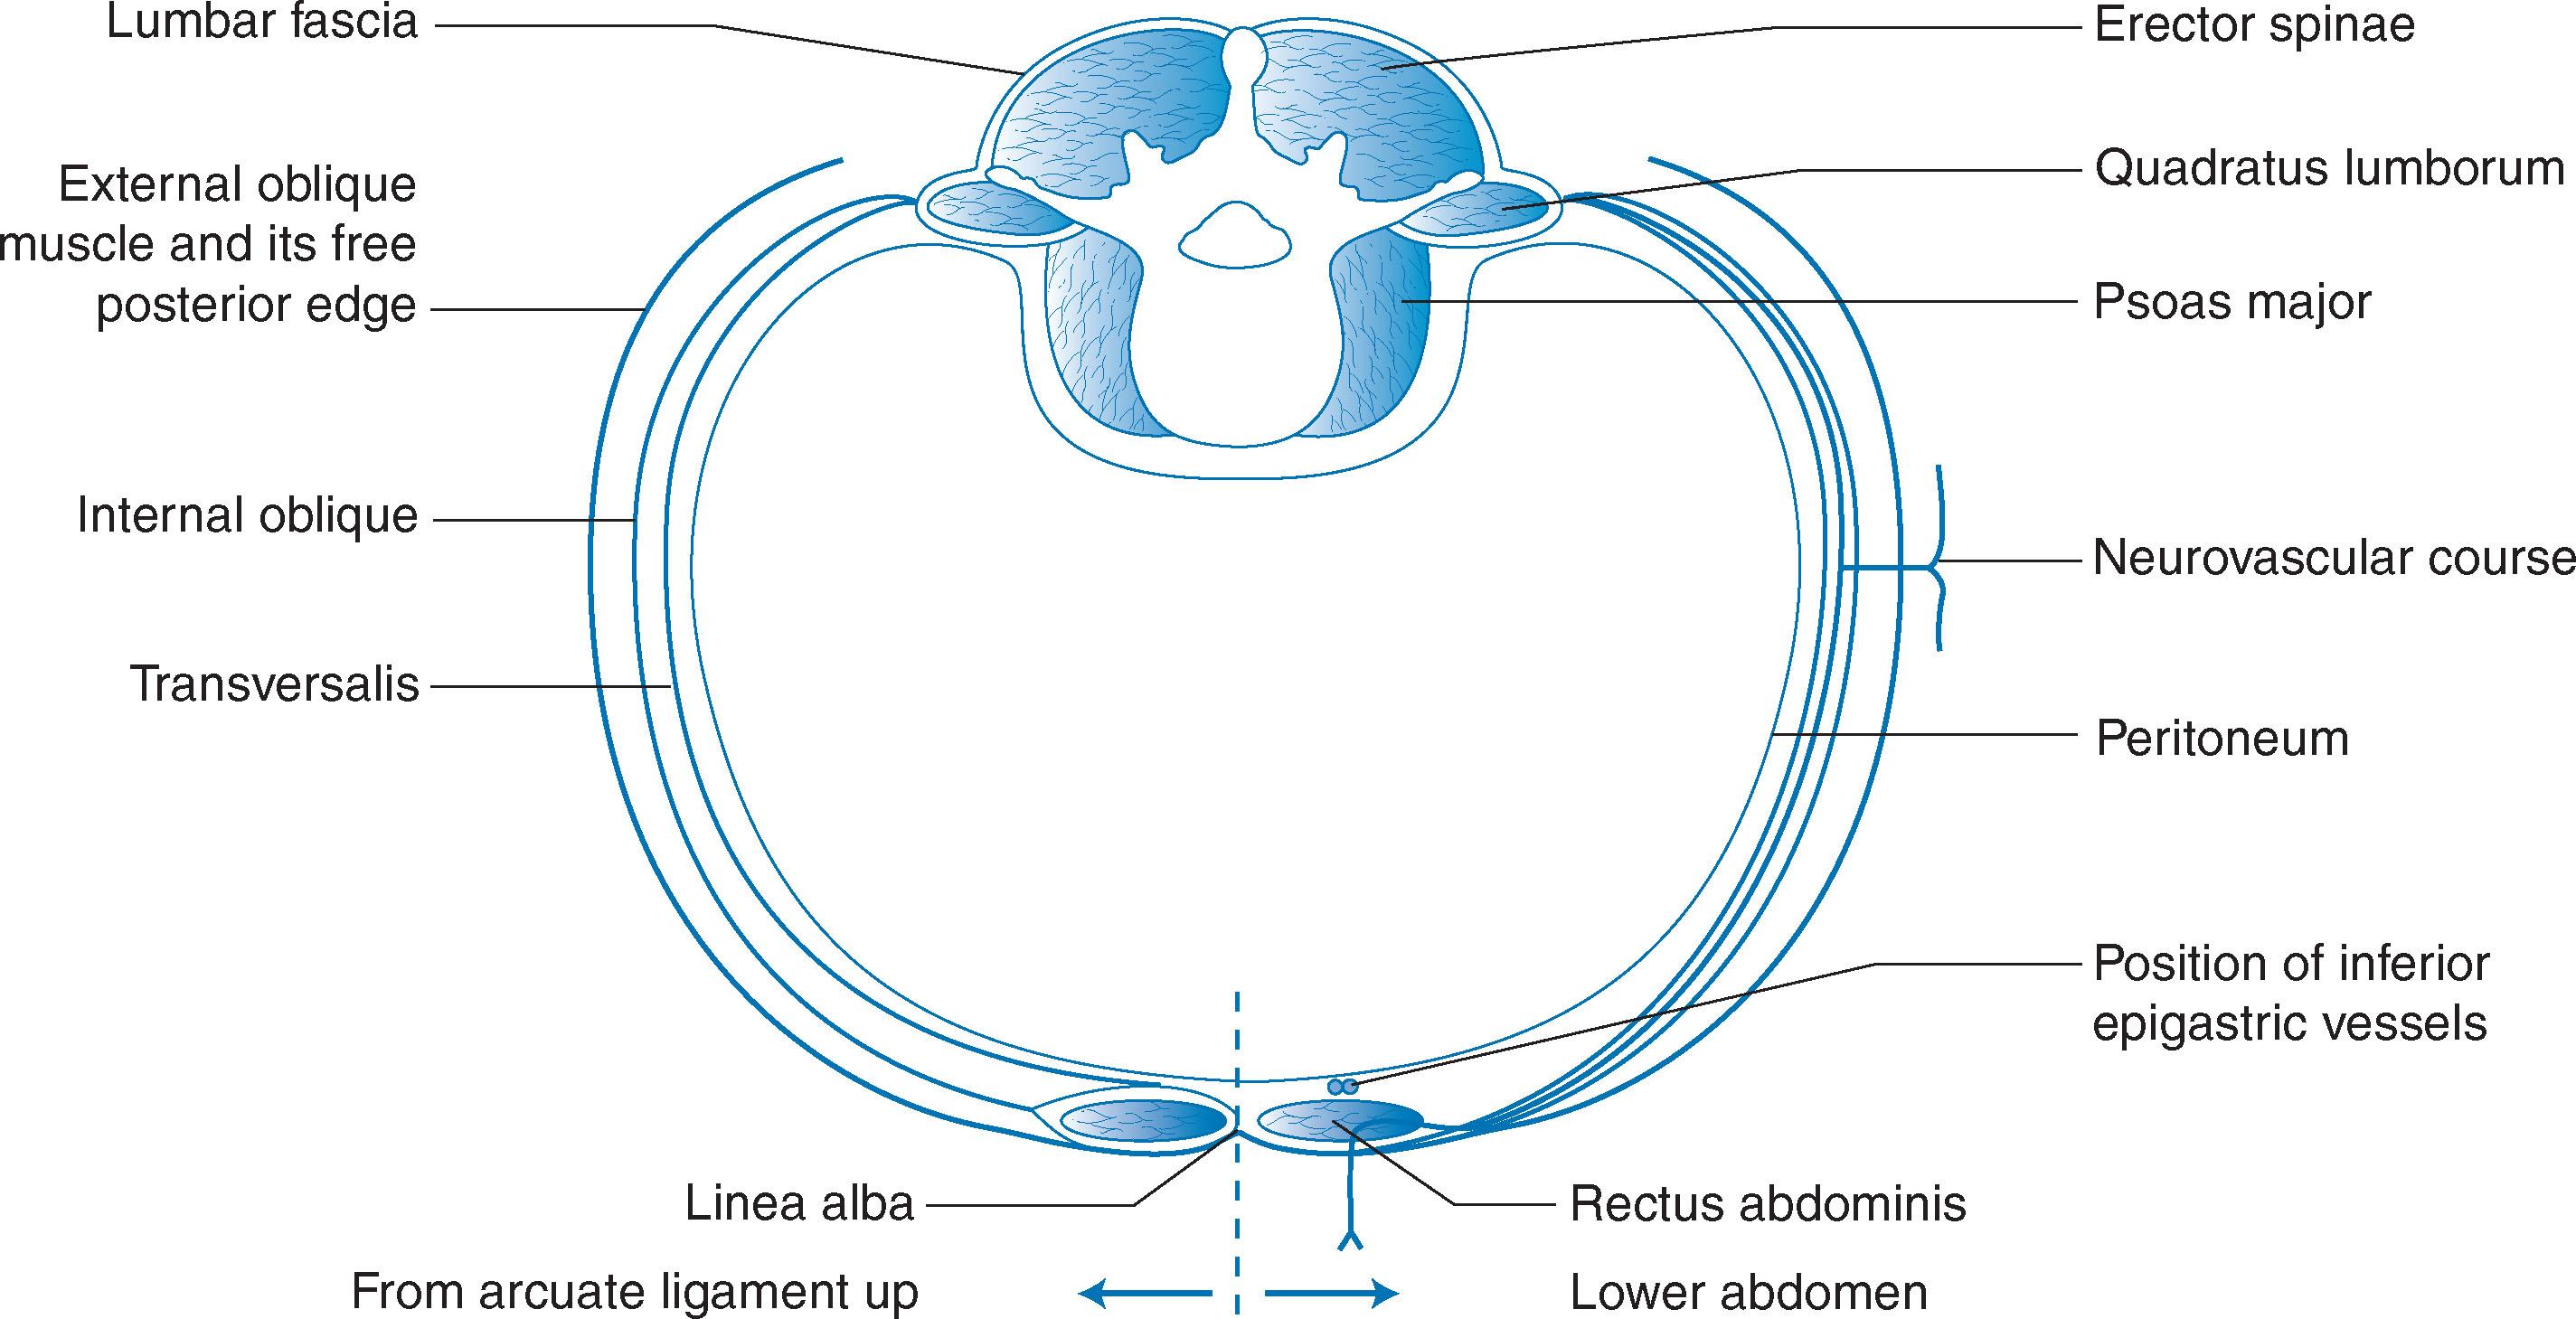 Fig. 5.11, Transverse section through the abdomen showing the muscular arrangements and fascial coverings of the rectus abdominis muscle at different levels (see text) and illustrating the neurovascular plane and course.